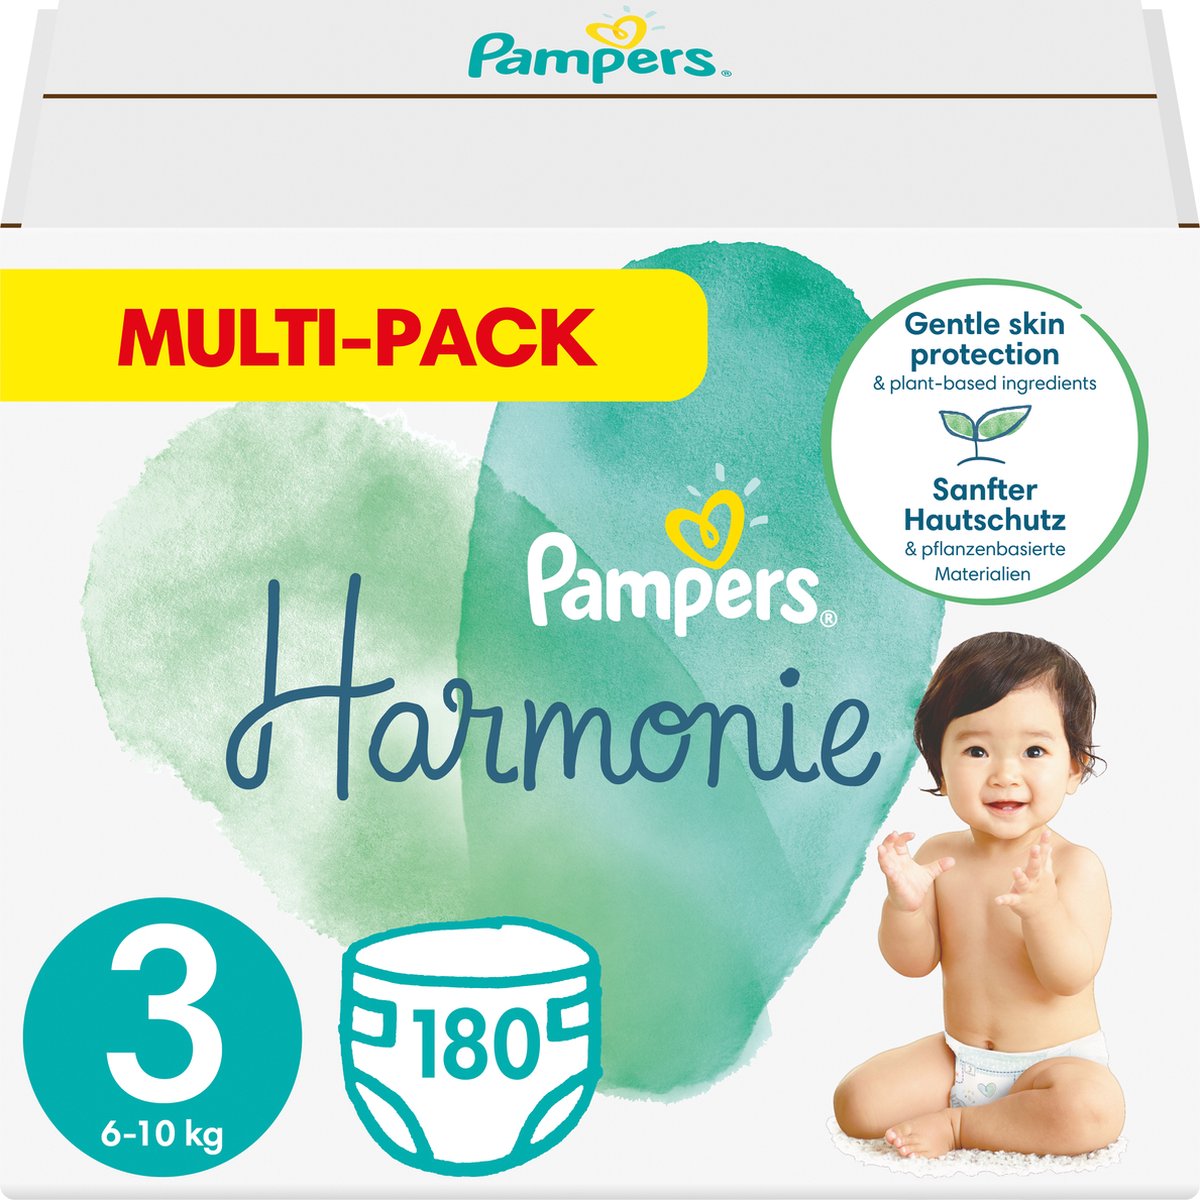 Pampers Harmonie Taille 3 - 180 Couches - 6kg-10kg - Pack 1 Mois | bol.com